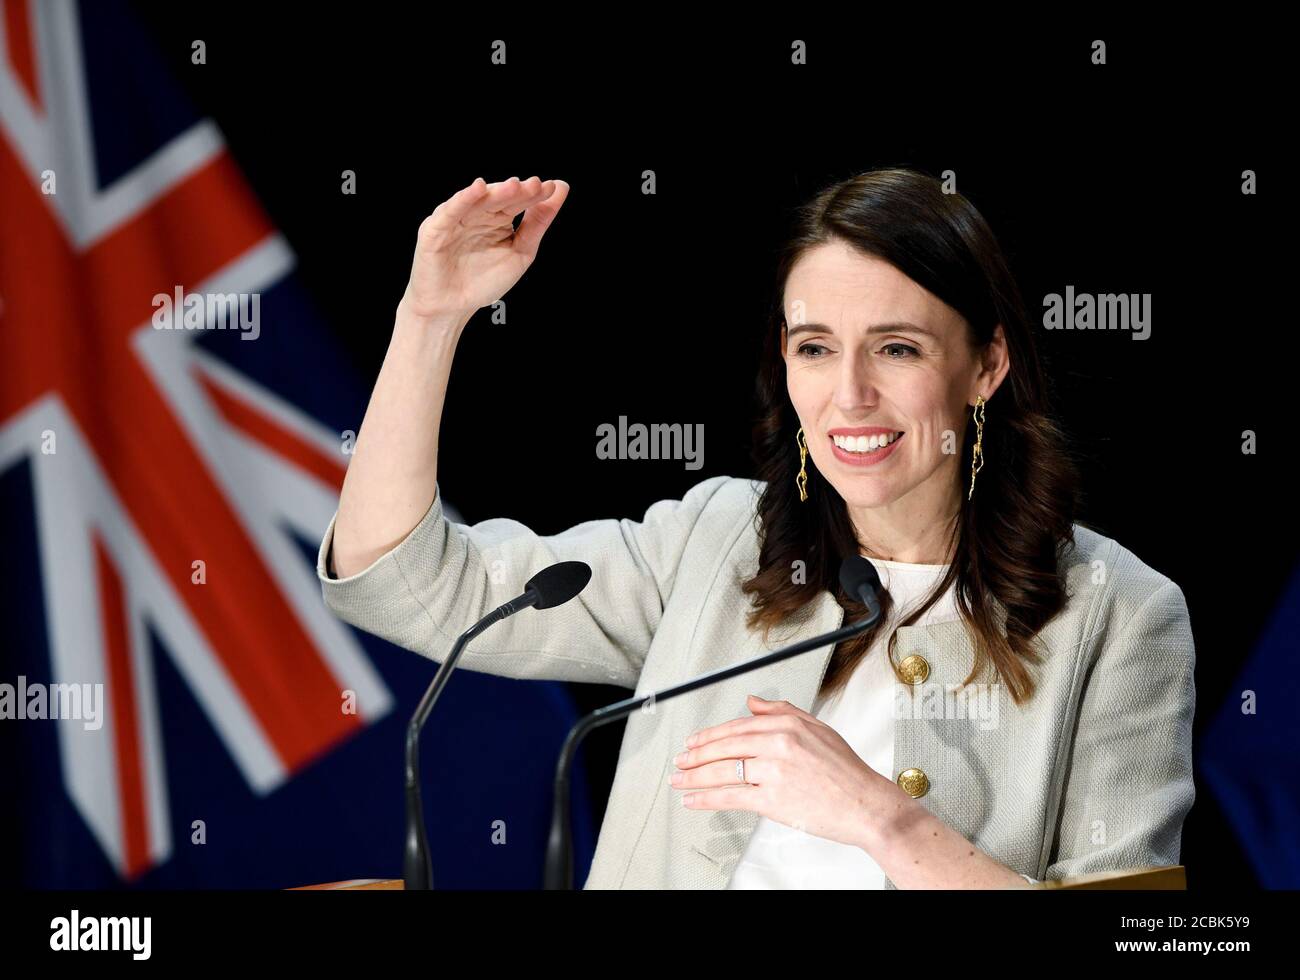 Wellington, New Zealand. 14th Aug, 2020. New Zealand Prime Minister Jacinda Ardern speaks during a press conference in Wellington, New Zealand, Aug. 14, 2020. New Zealand's largest city Auckland will remain in COVID-19 Alert Level 3 for 12 more days, with the rest of the country staying in Alert Level 2, as there are currently 36 active cases, 17 of which are linked to the recent community transmission in Auckland. Credit: Guo Lei/Xinhua/Alamy Live News Stock Photo